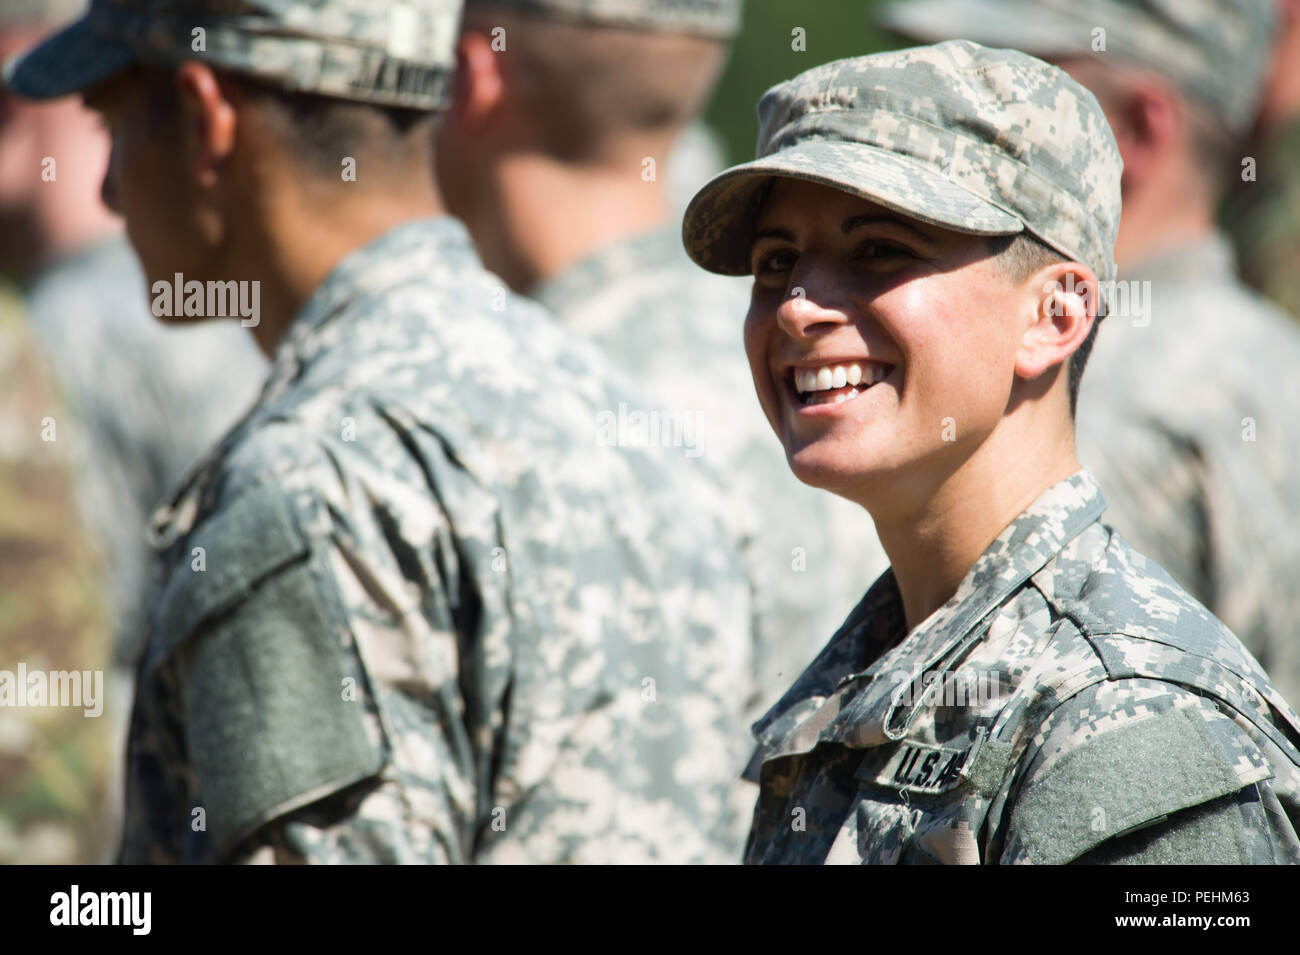 Capt. Kristen Griest smiles at friends and family as she waits with her  U.S. Army Ranger School Class 08-15 to graduate at Fort Benning, Ga., Aug.  21, 2015. Griest and class member